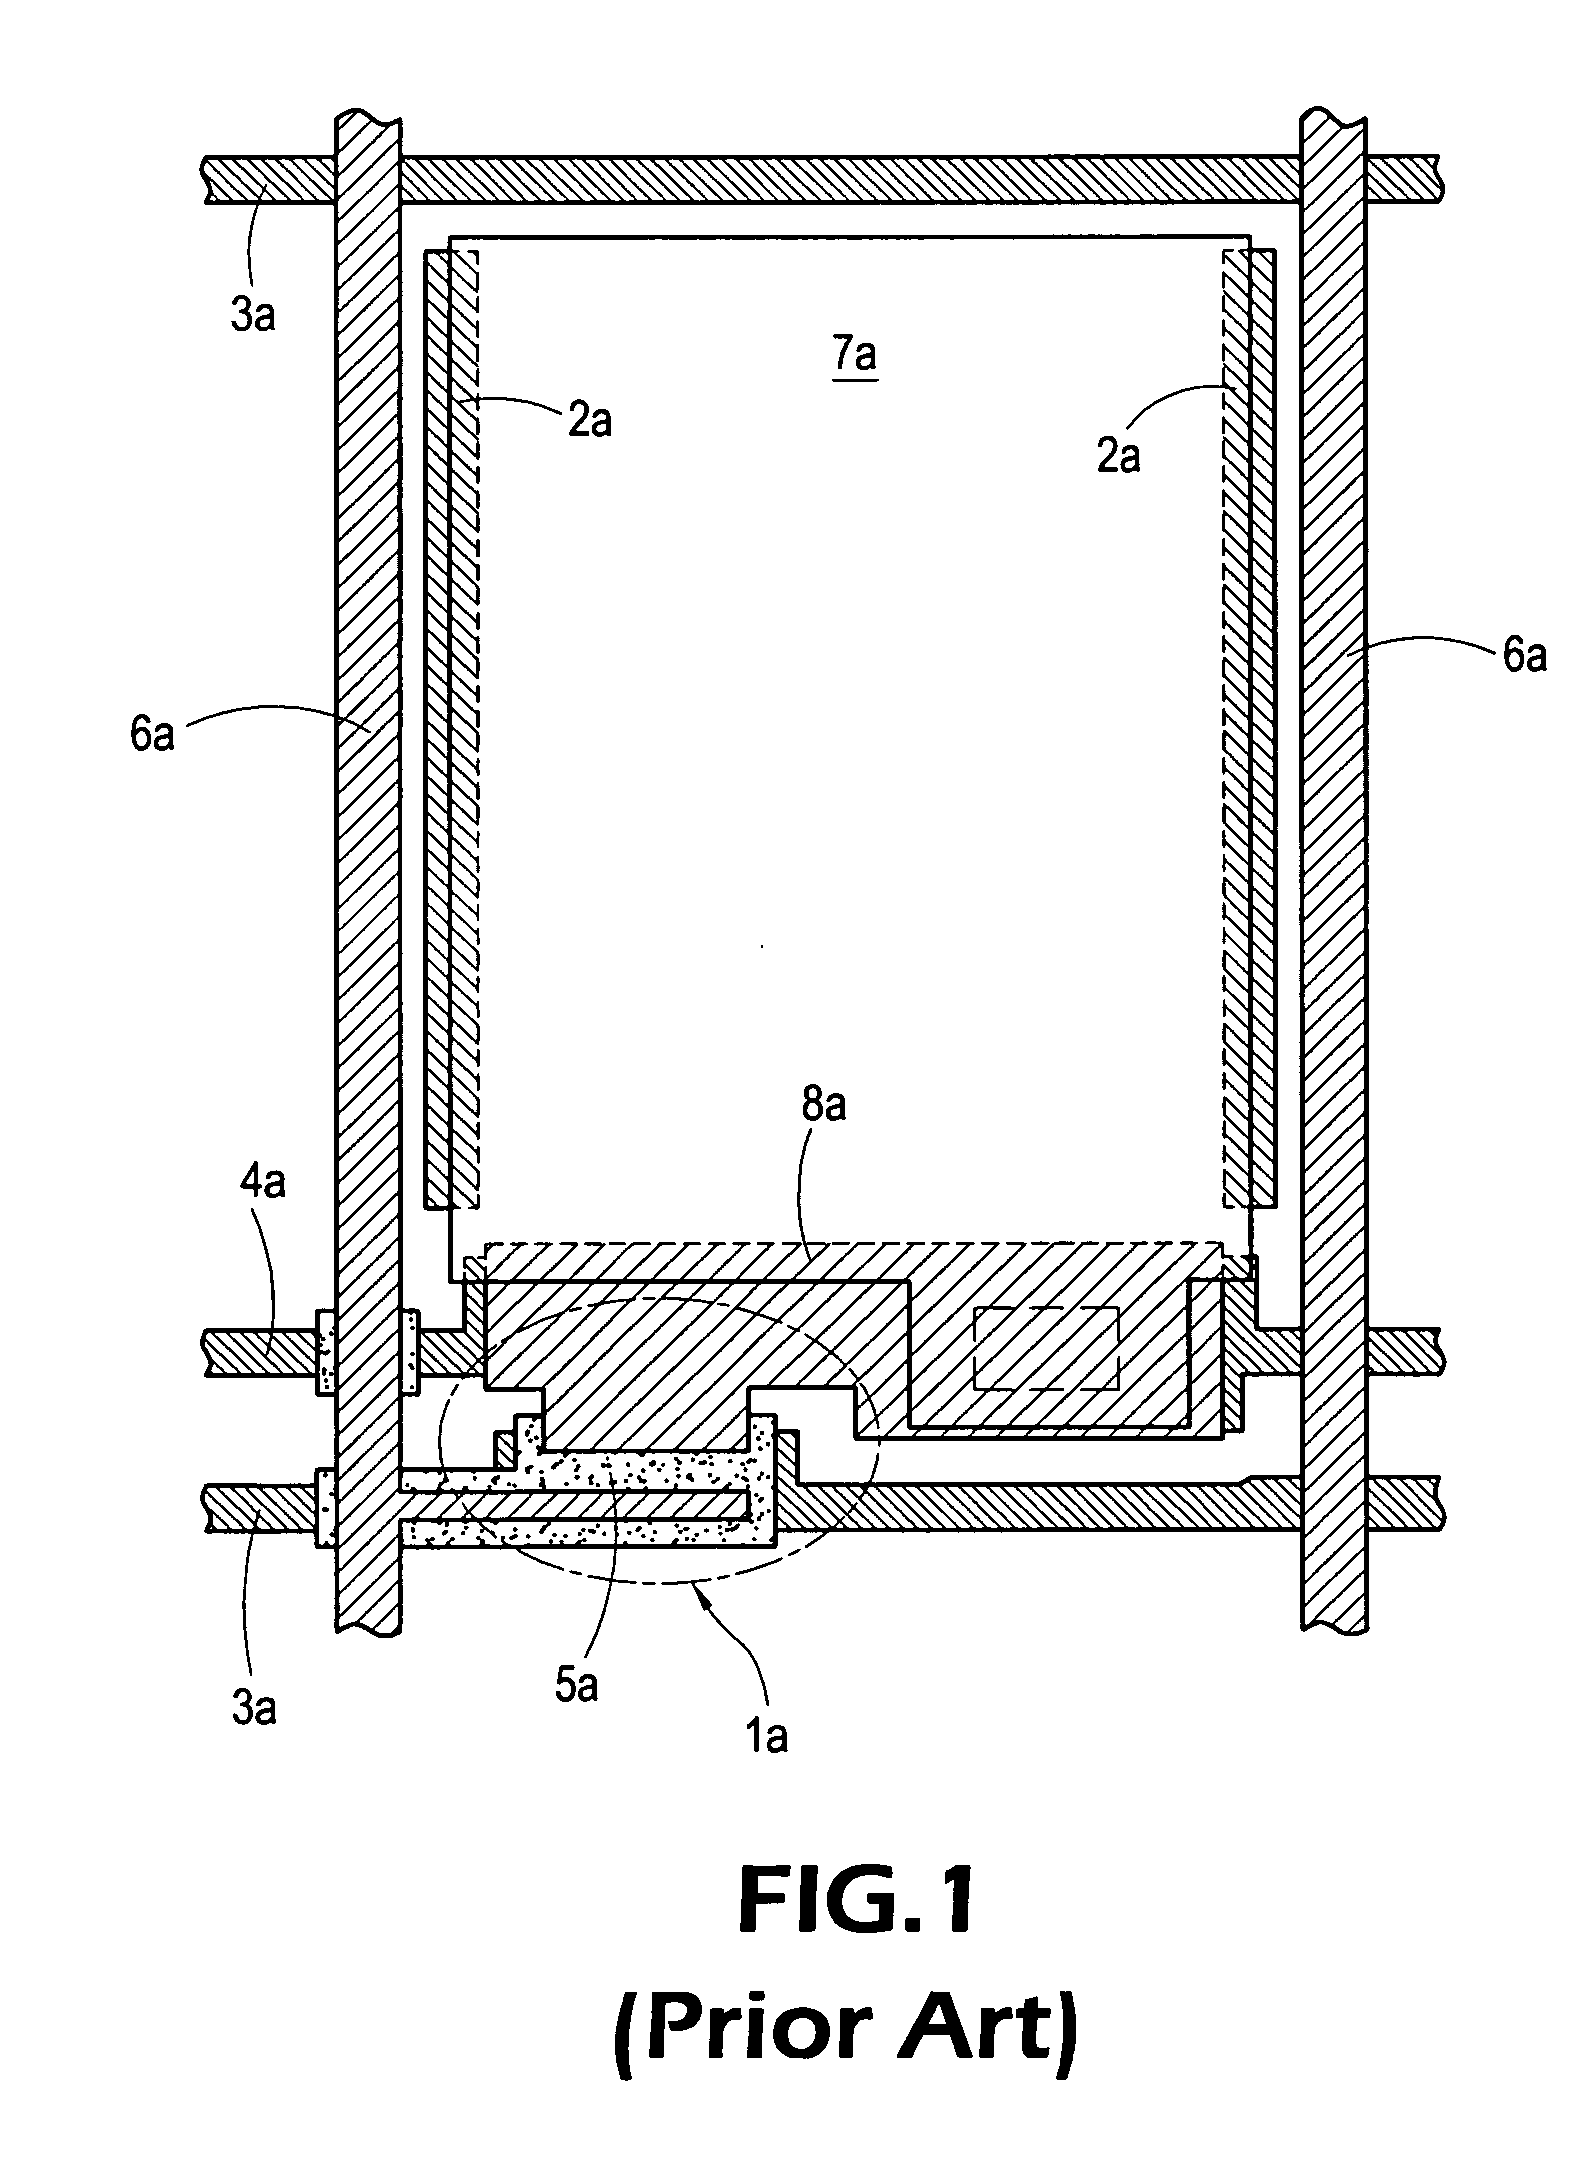 Pixel structure of a thin film transistor liquid crystal display